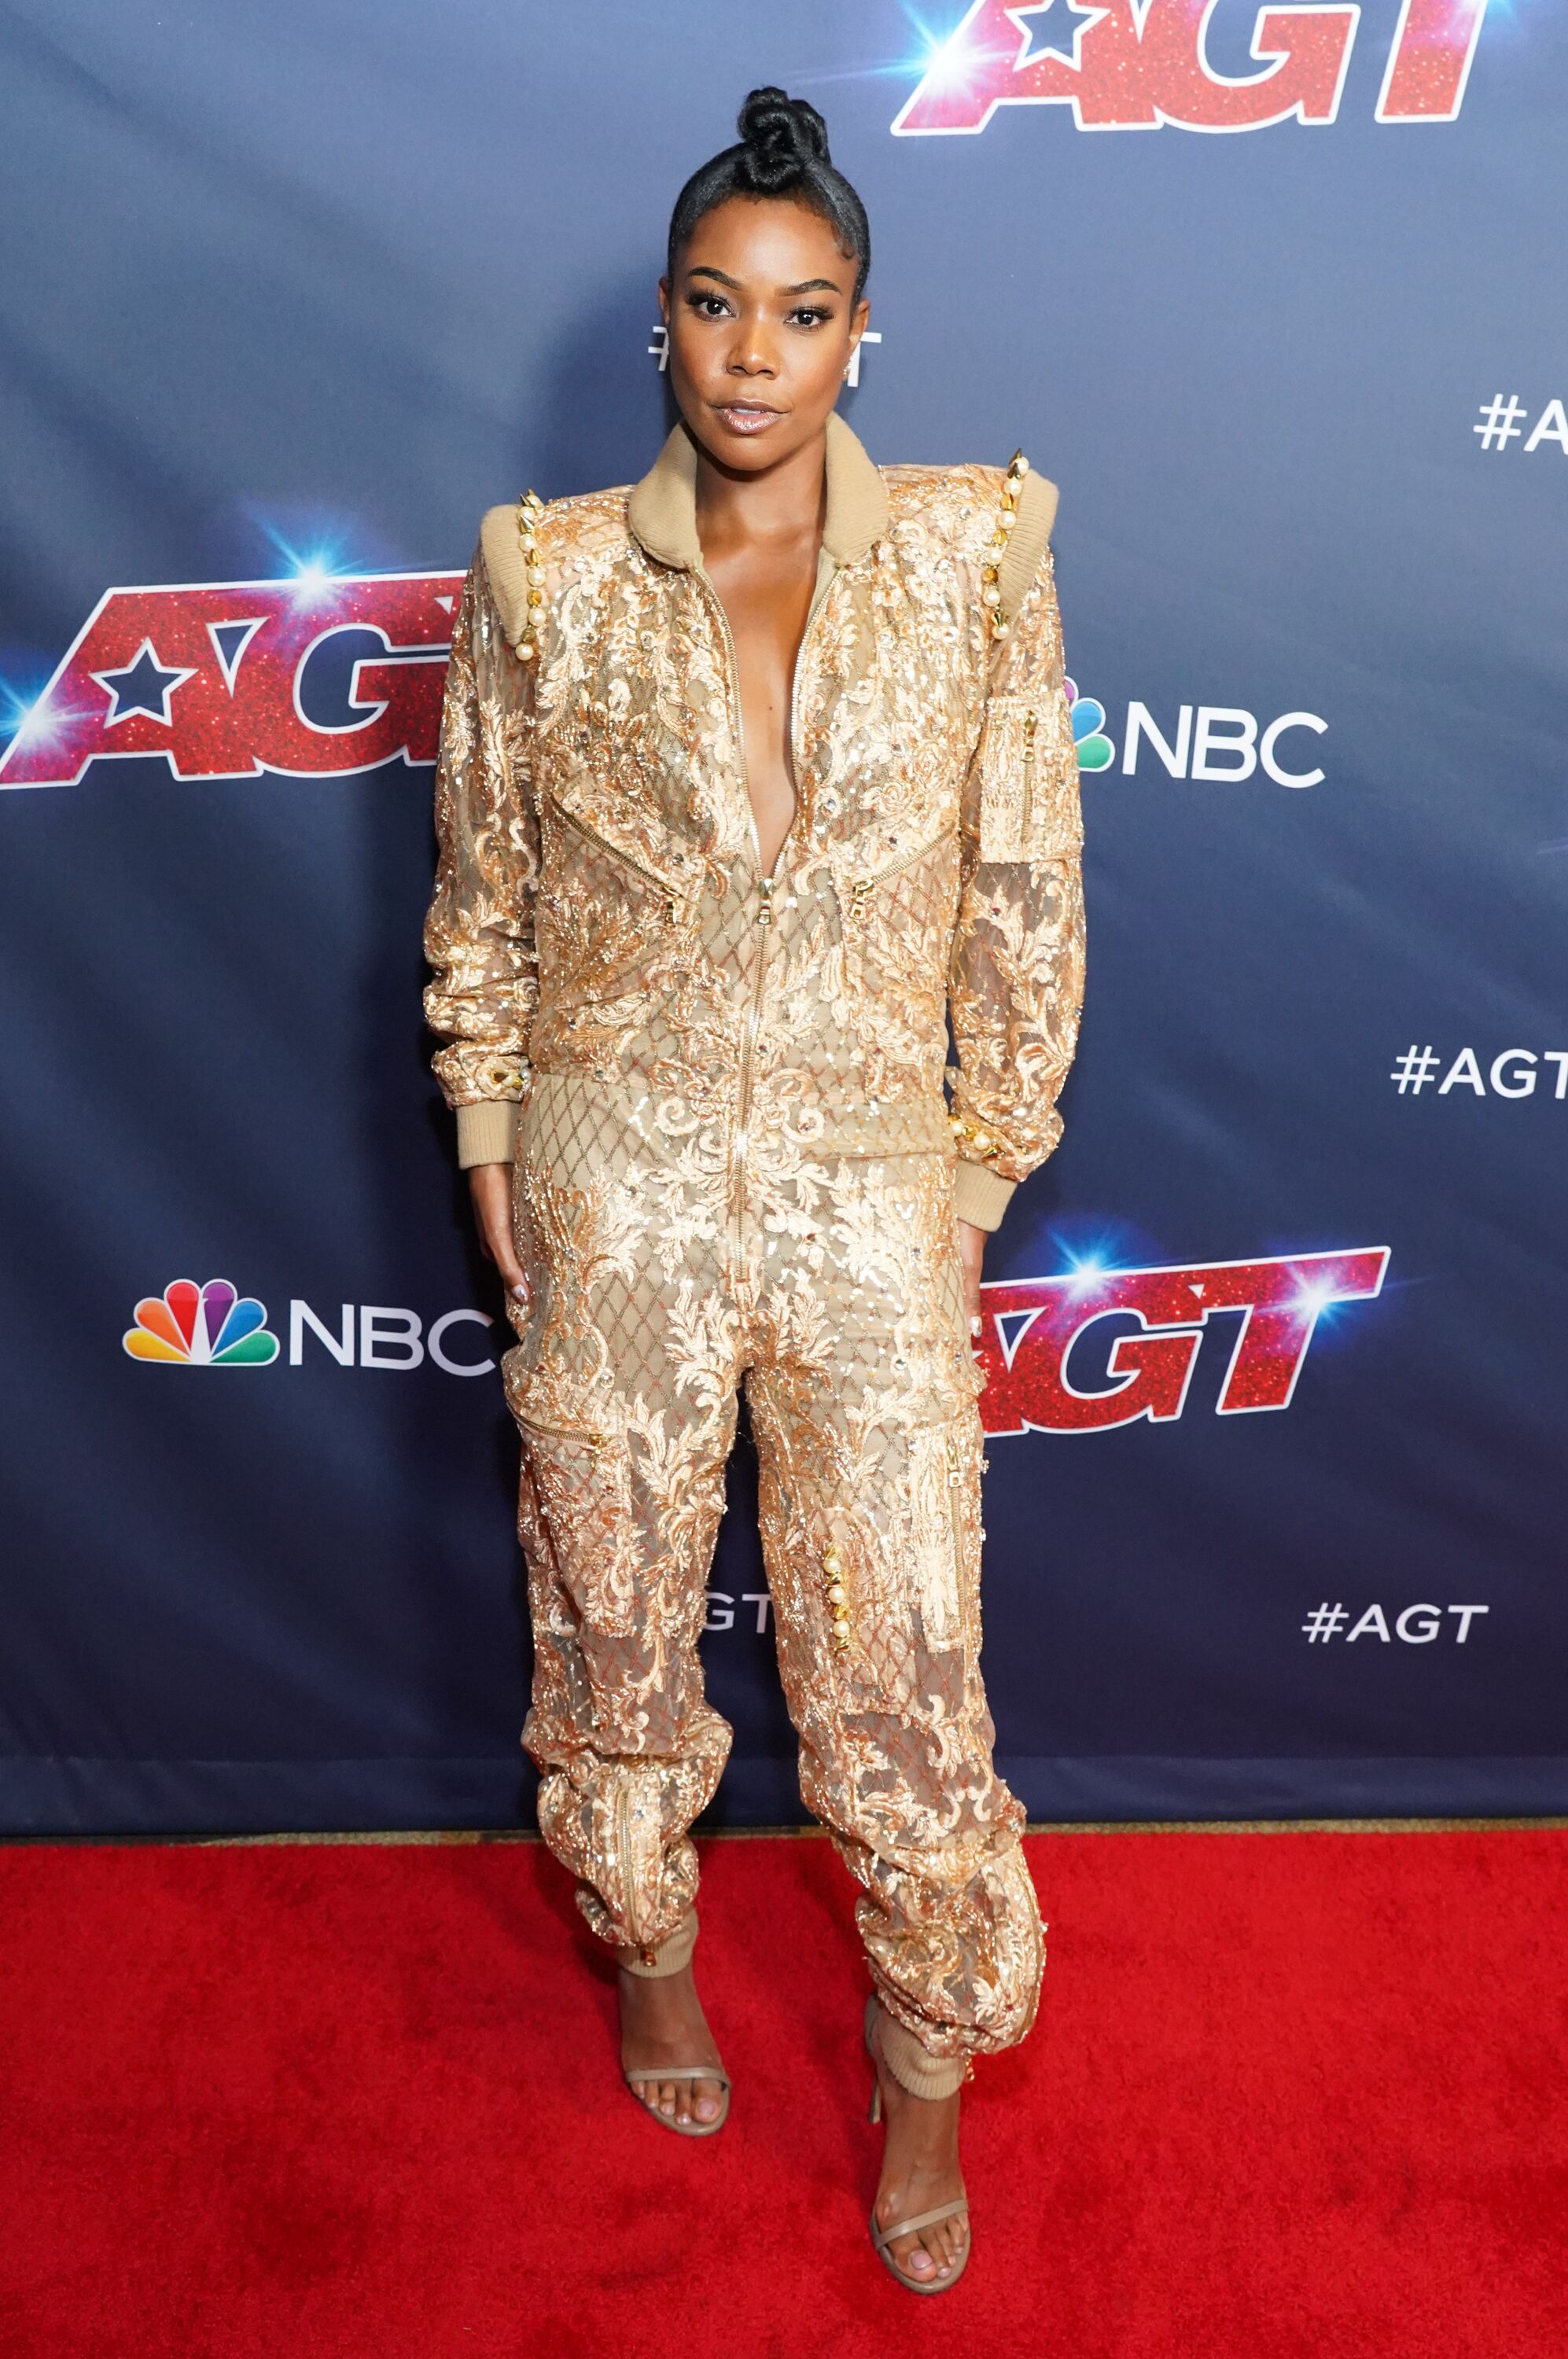 Gabrielle Union on the red carpet event of "America's Got Talent" | Source: Getty Images/GlobalImagesUkraine